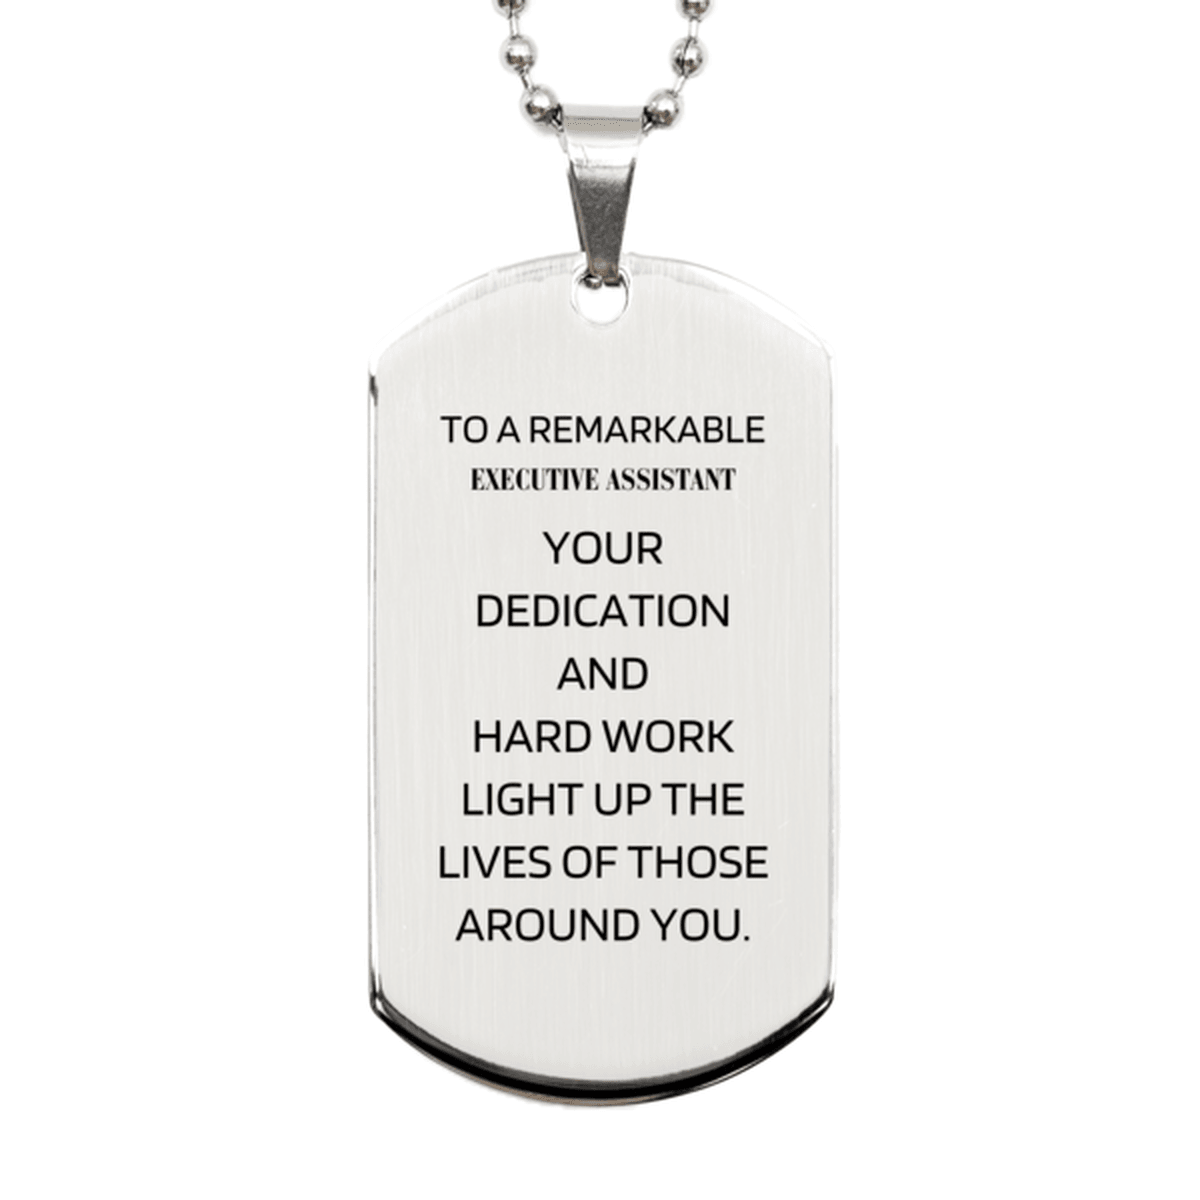 Remarkable Executive Assistant Gifts, Your dedication and hard work, Inspirational Birthday Christmas Unique Silver Dog Tag For Executive Assistant, Coworkers, Men, Women, Friends - Mallard Moon Gift Shop